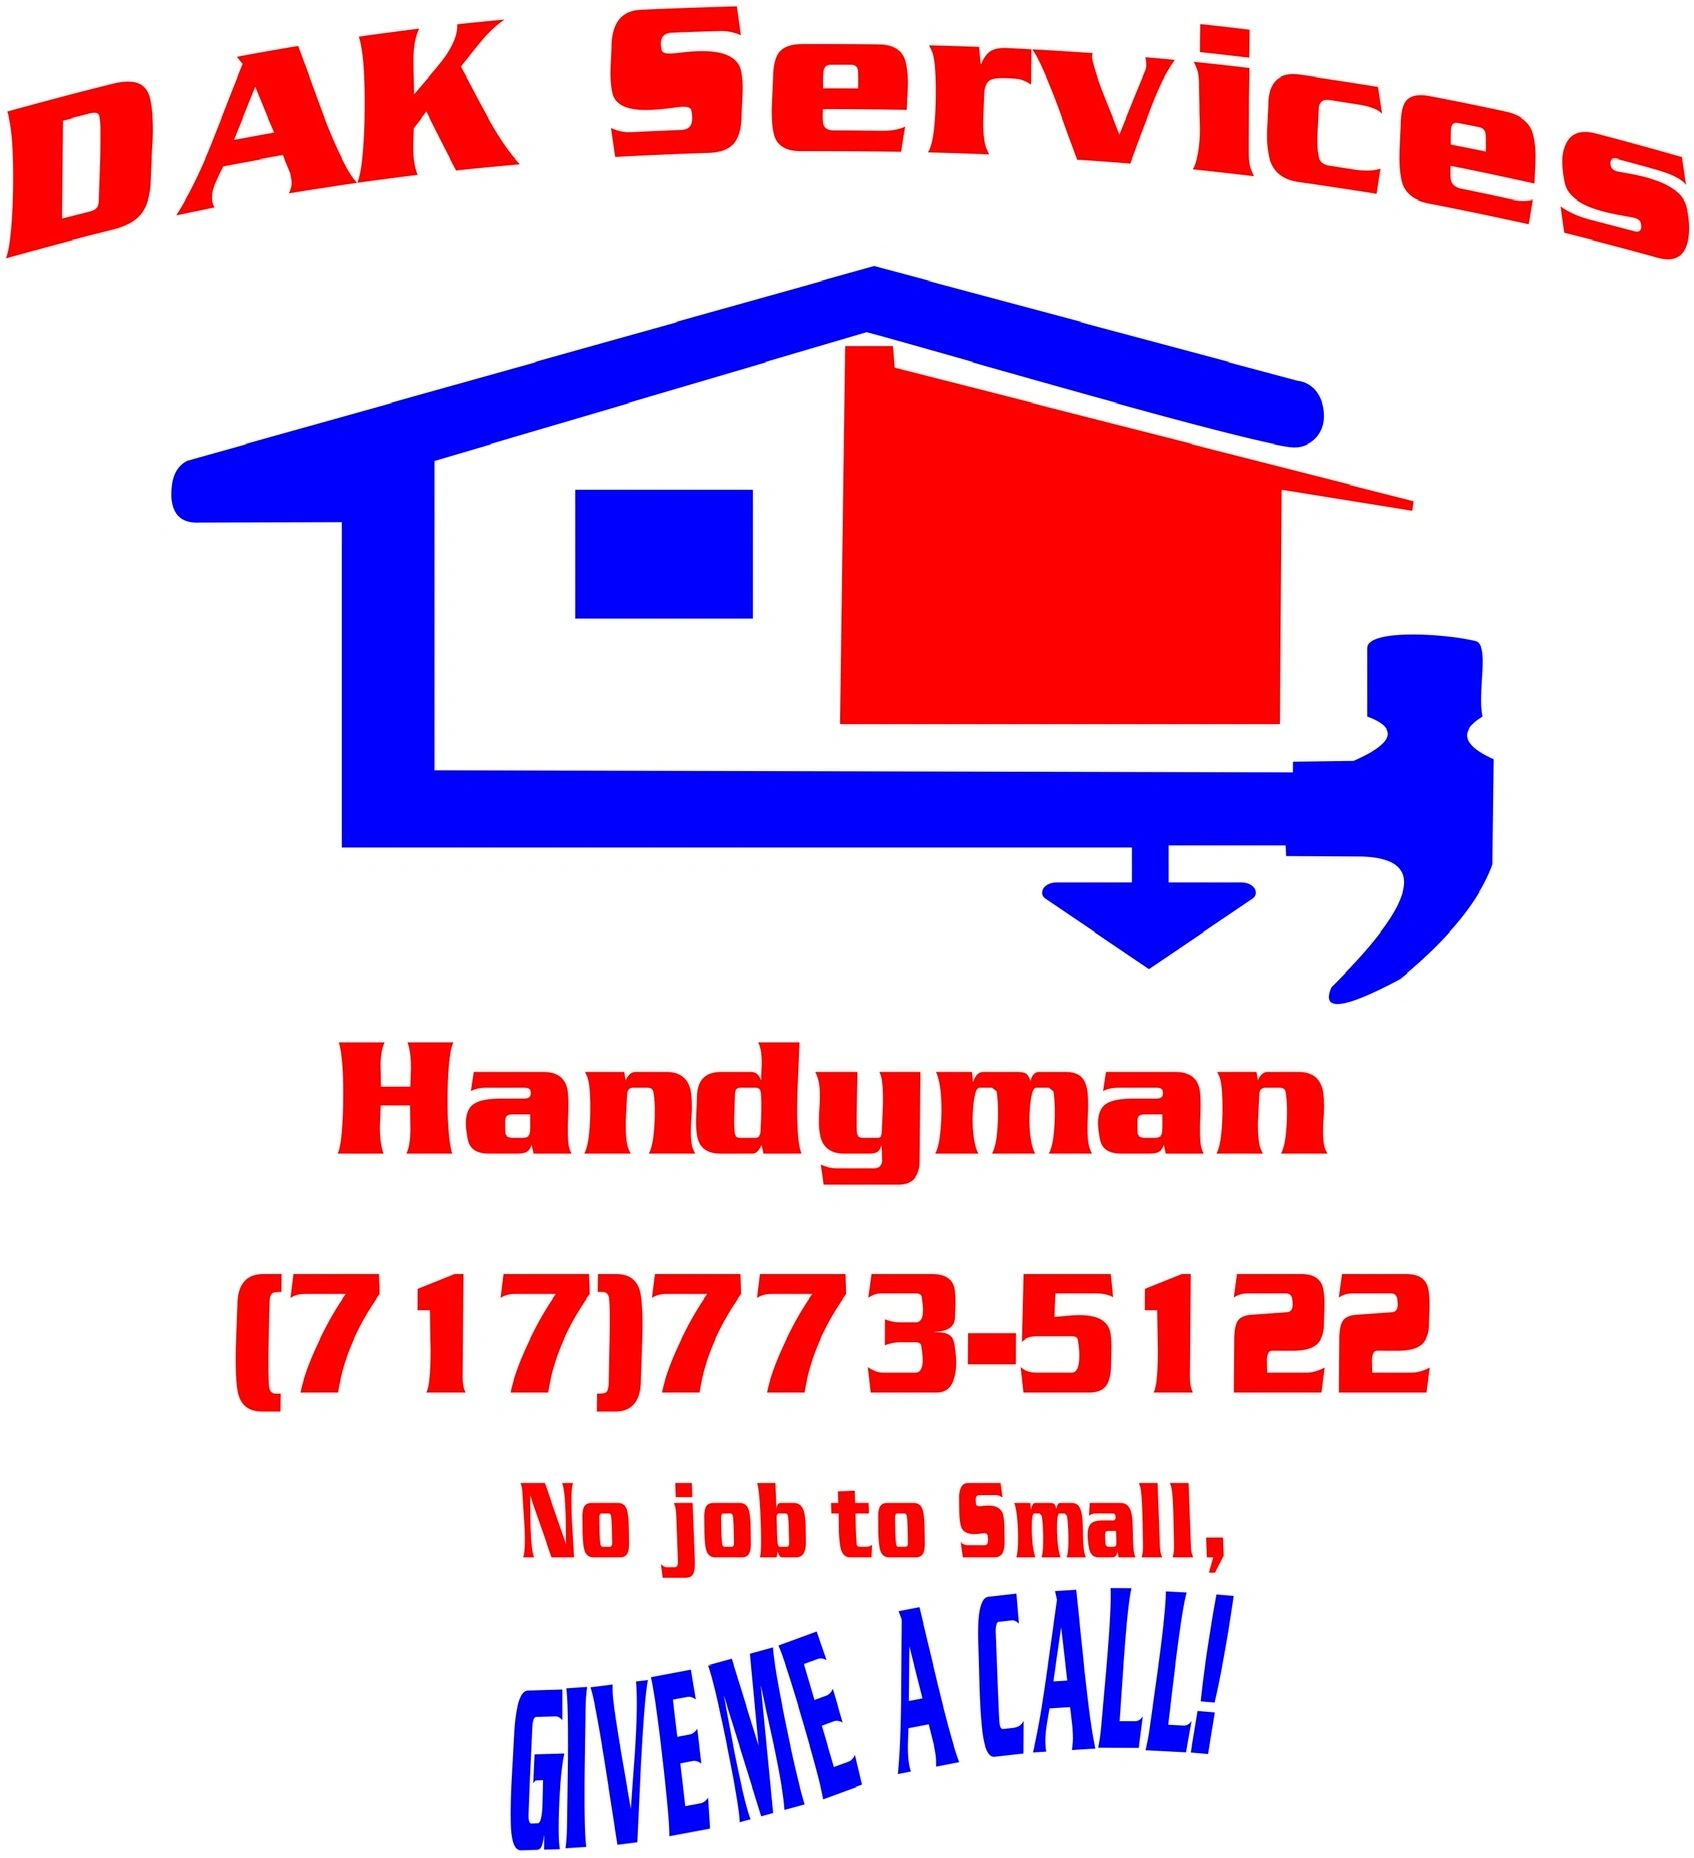 Give us a call for all your home improvement needs. 